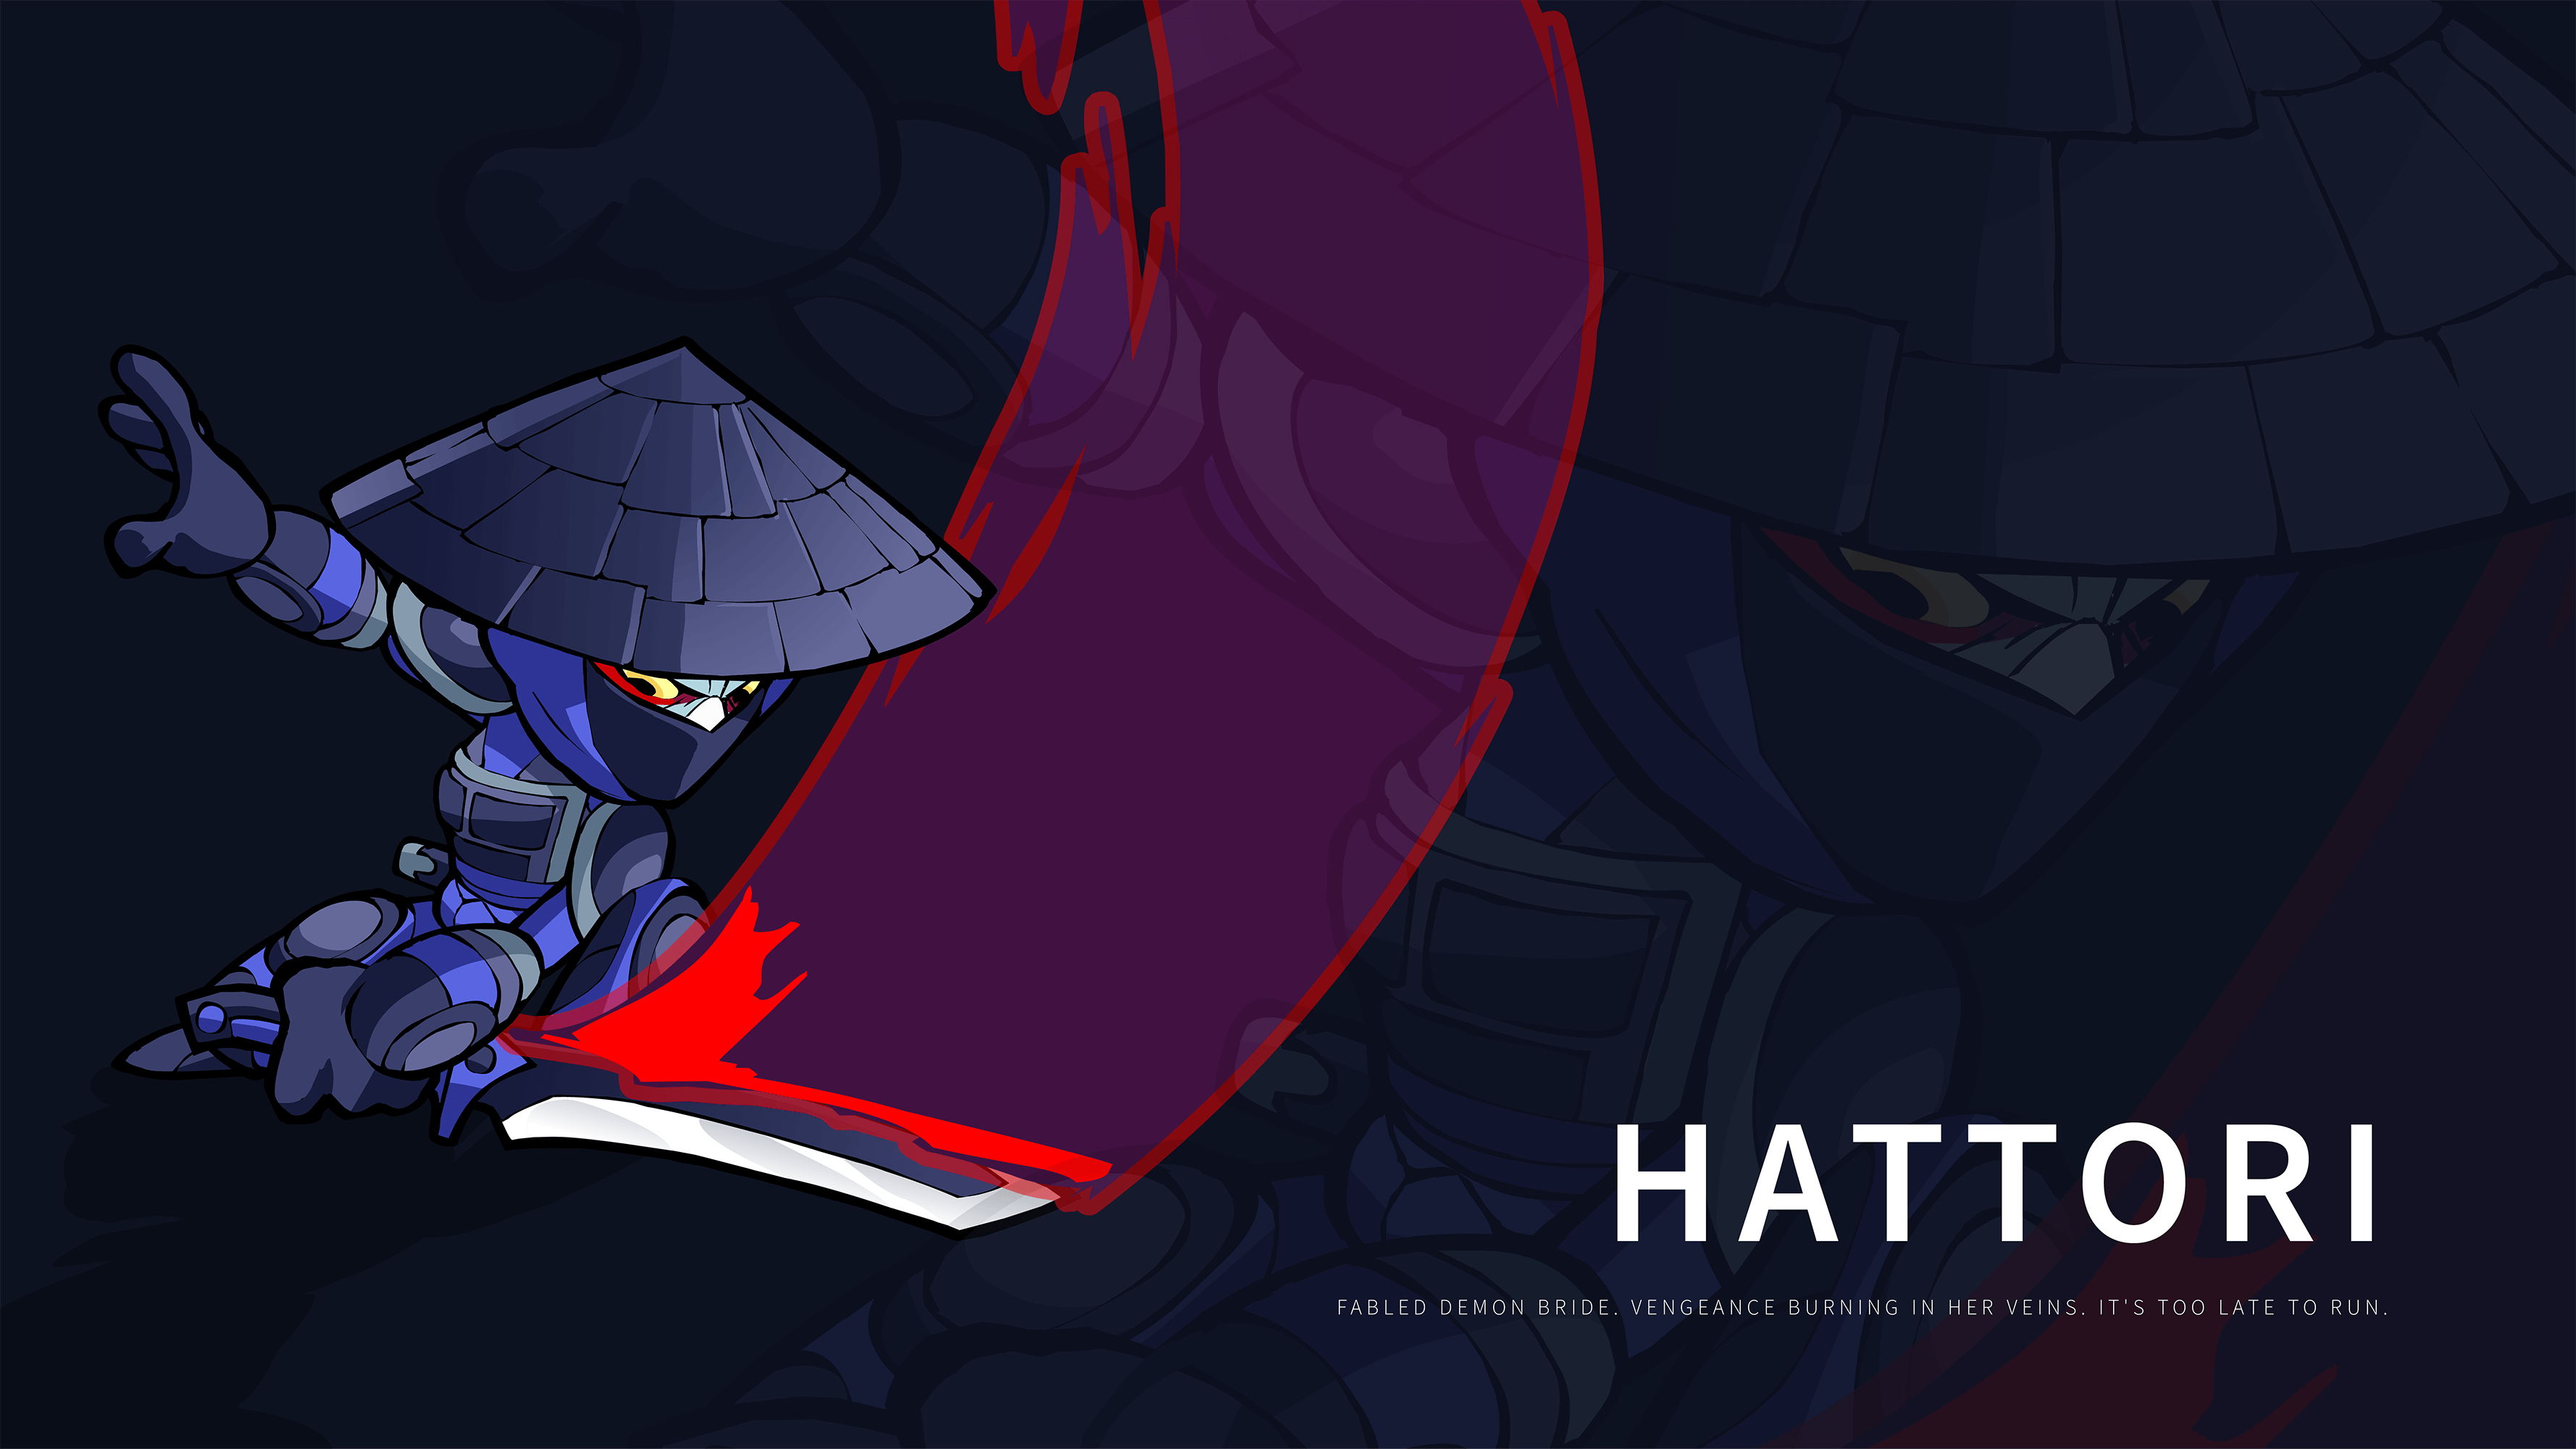 Brawlhalla Wallpapers - Wallpaper Cave